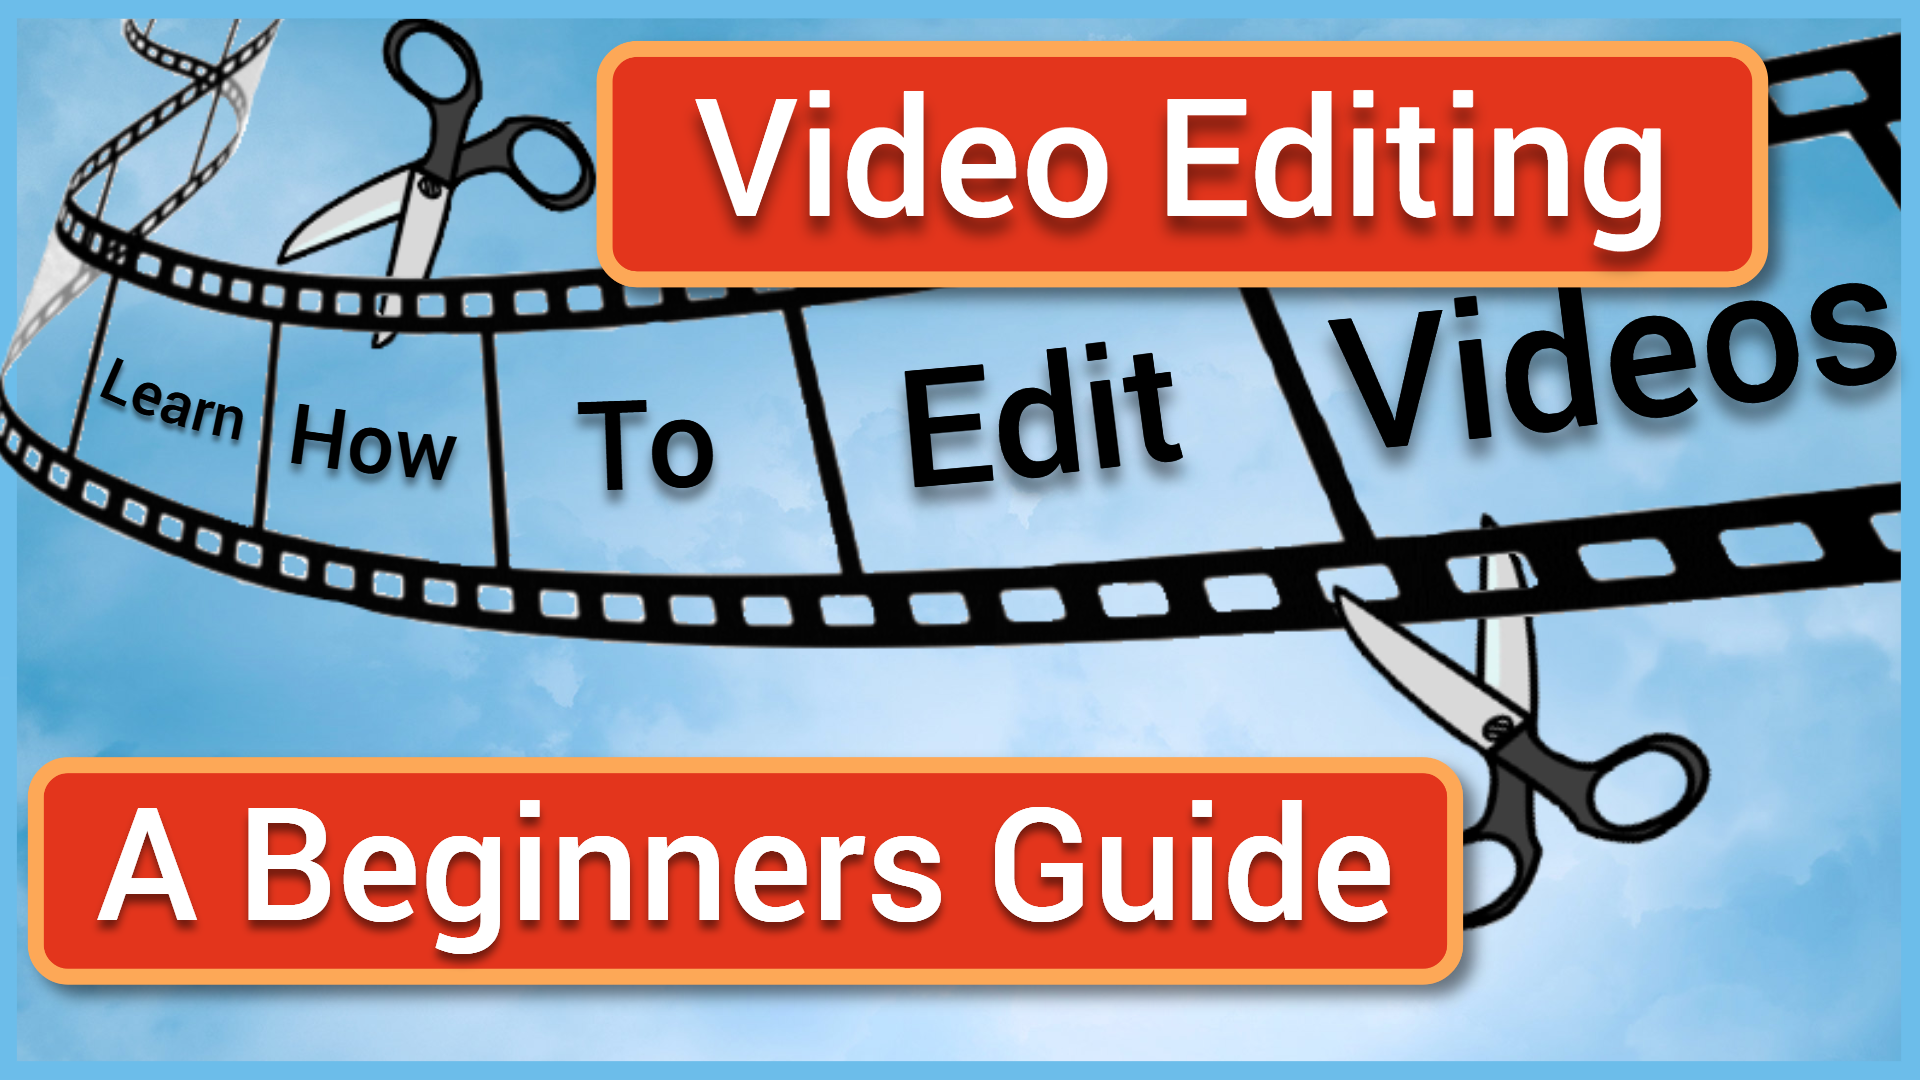 A Beginner's Guide to Video Editing (Interactive Workshop)